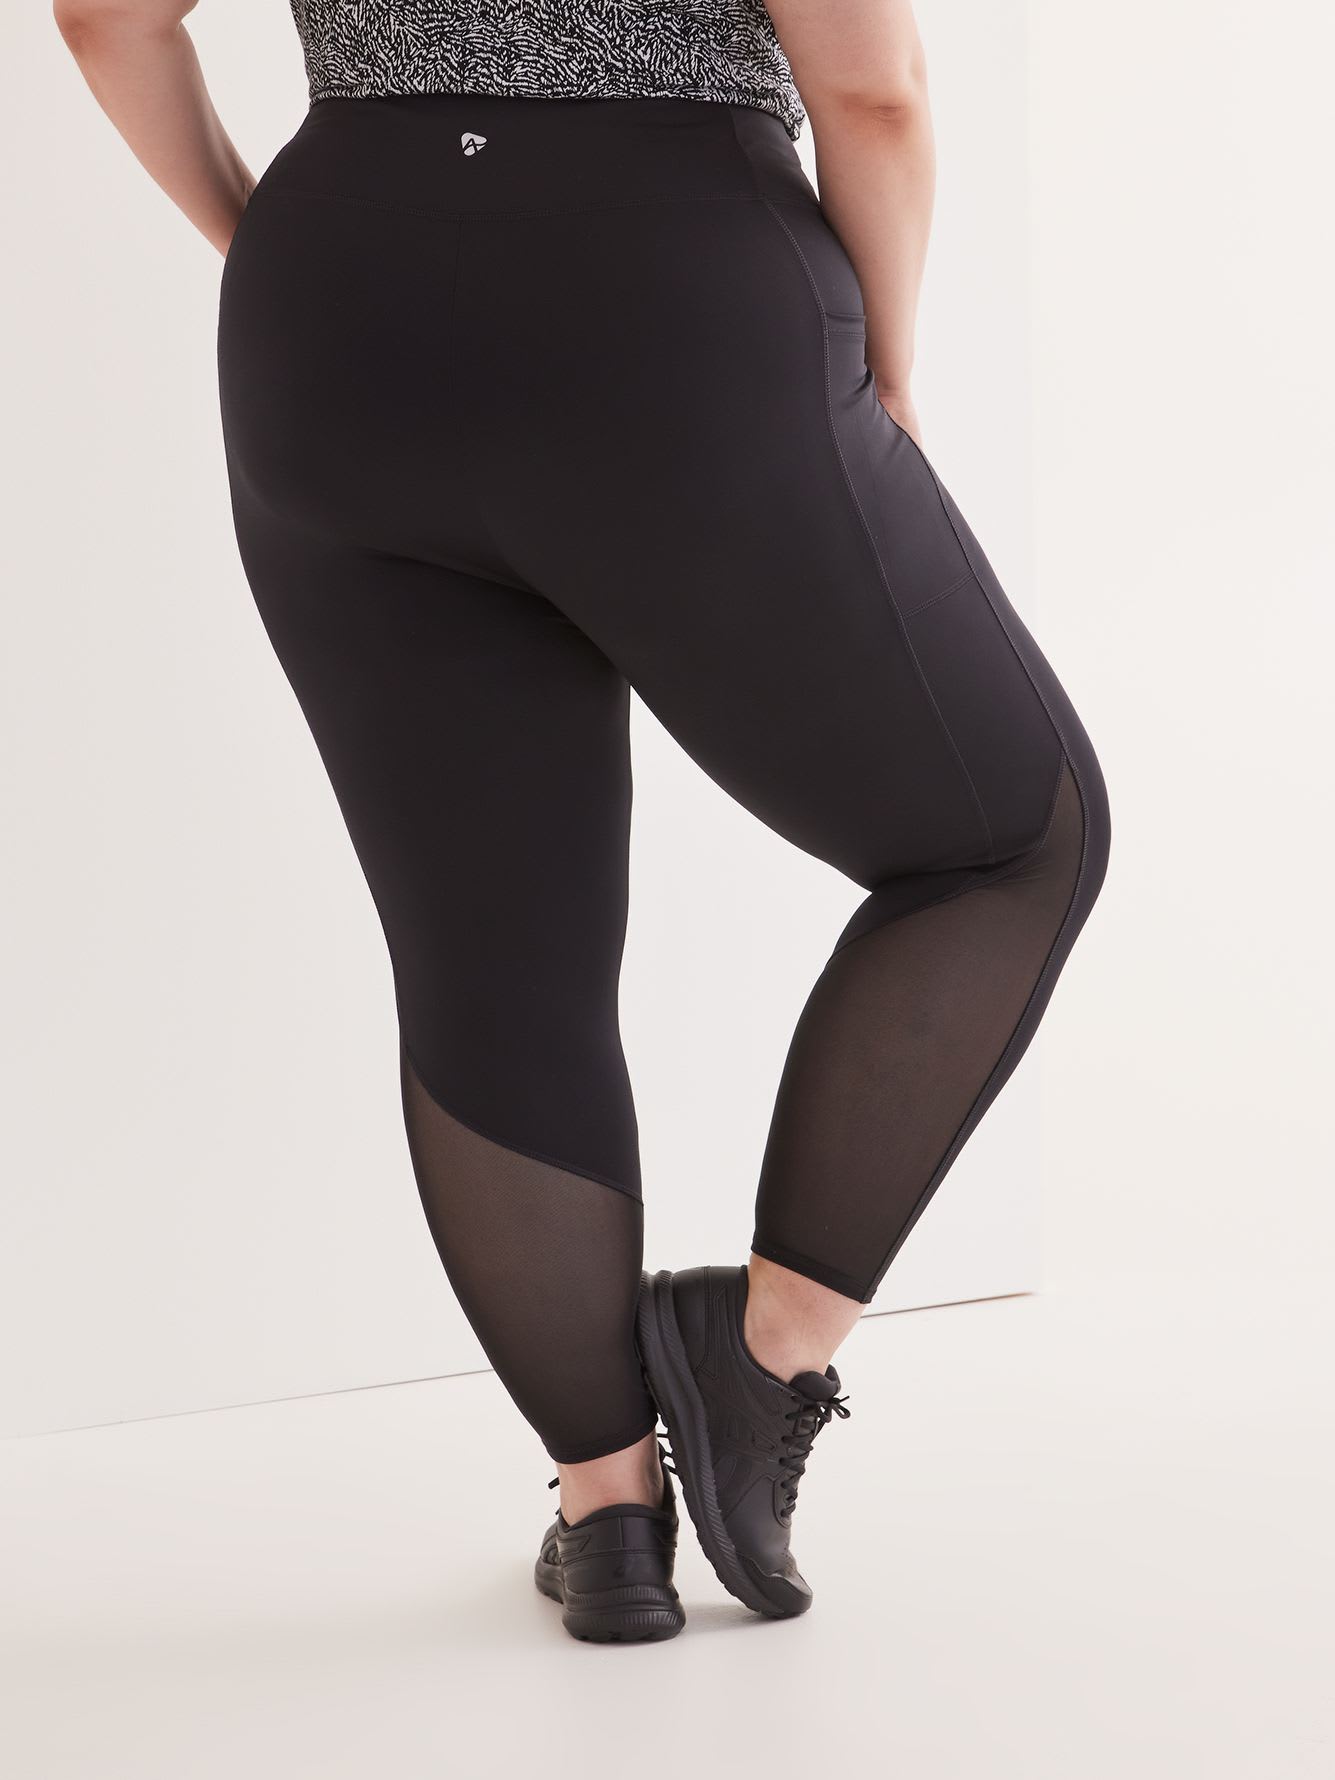 Women's Solid High Waist Leggings with Mesh Panel and Side Pockets